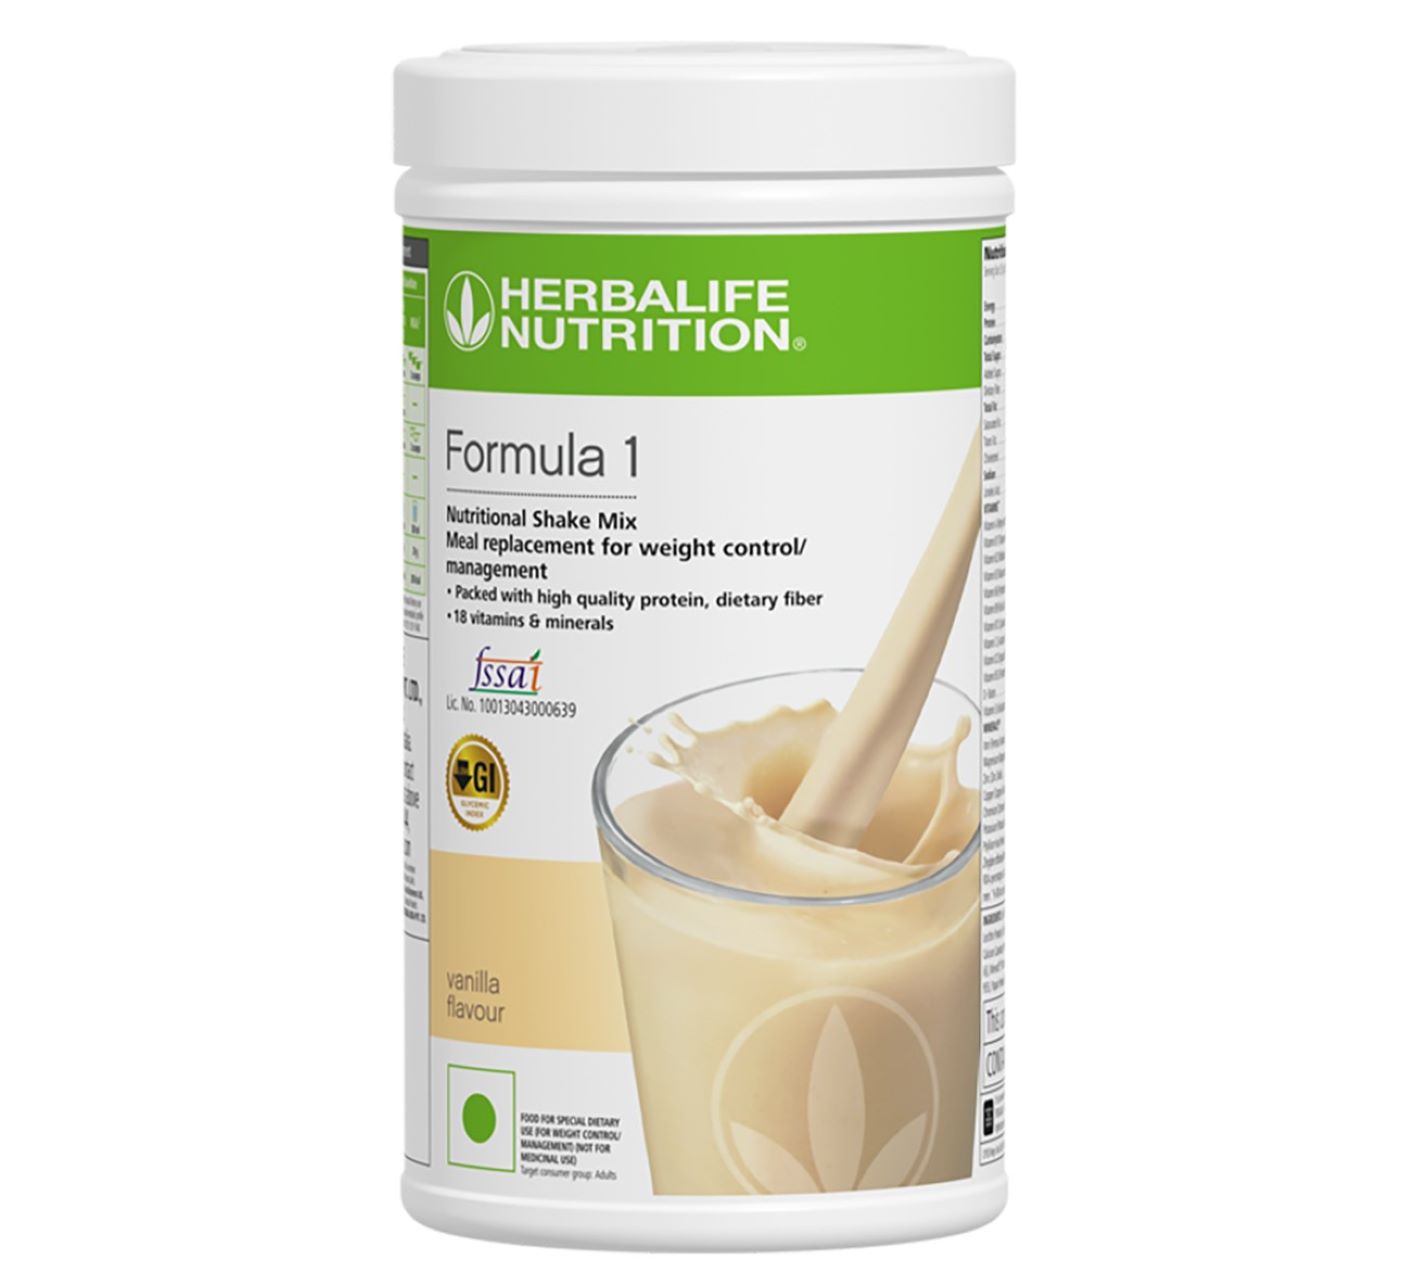 10-formula-1-herbalife-nutrition-facts